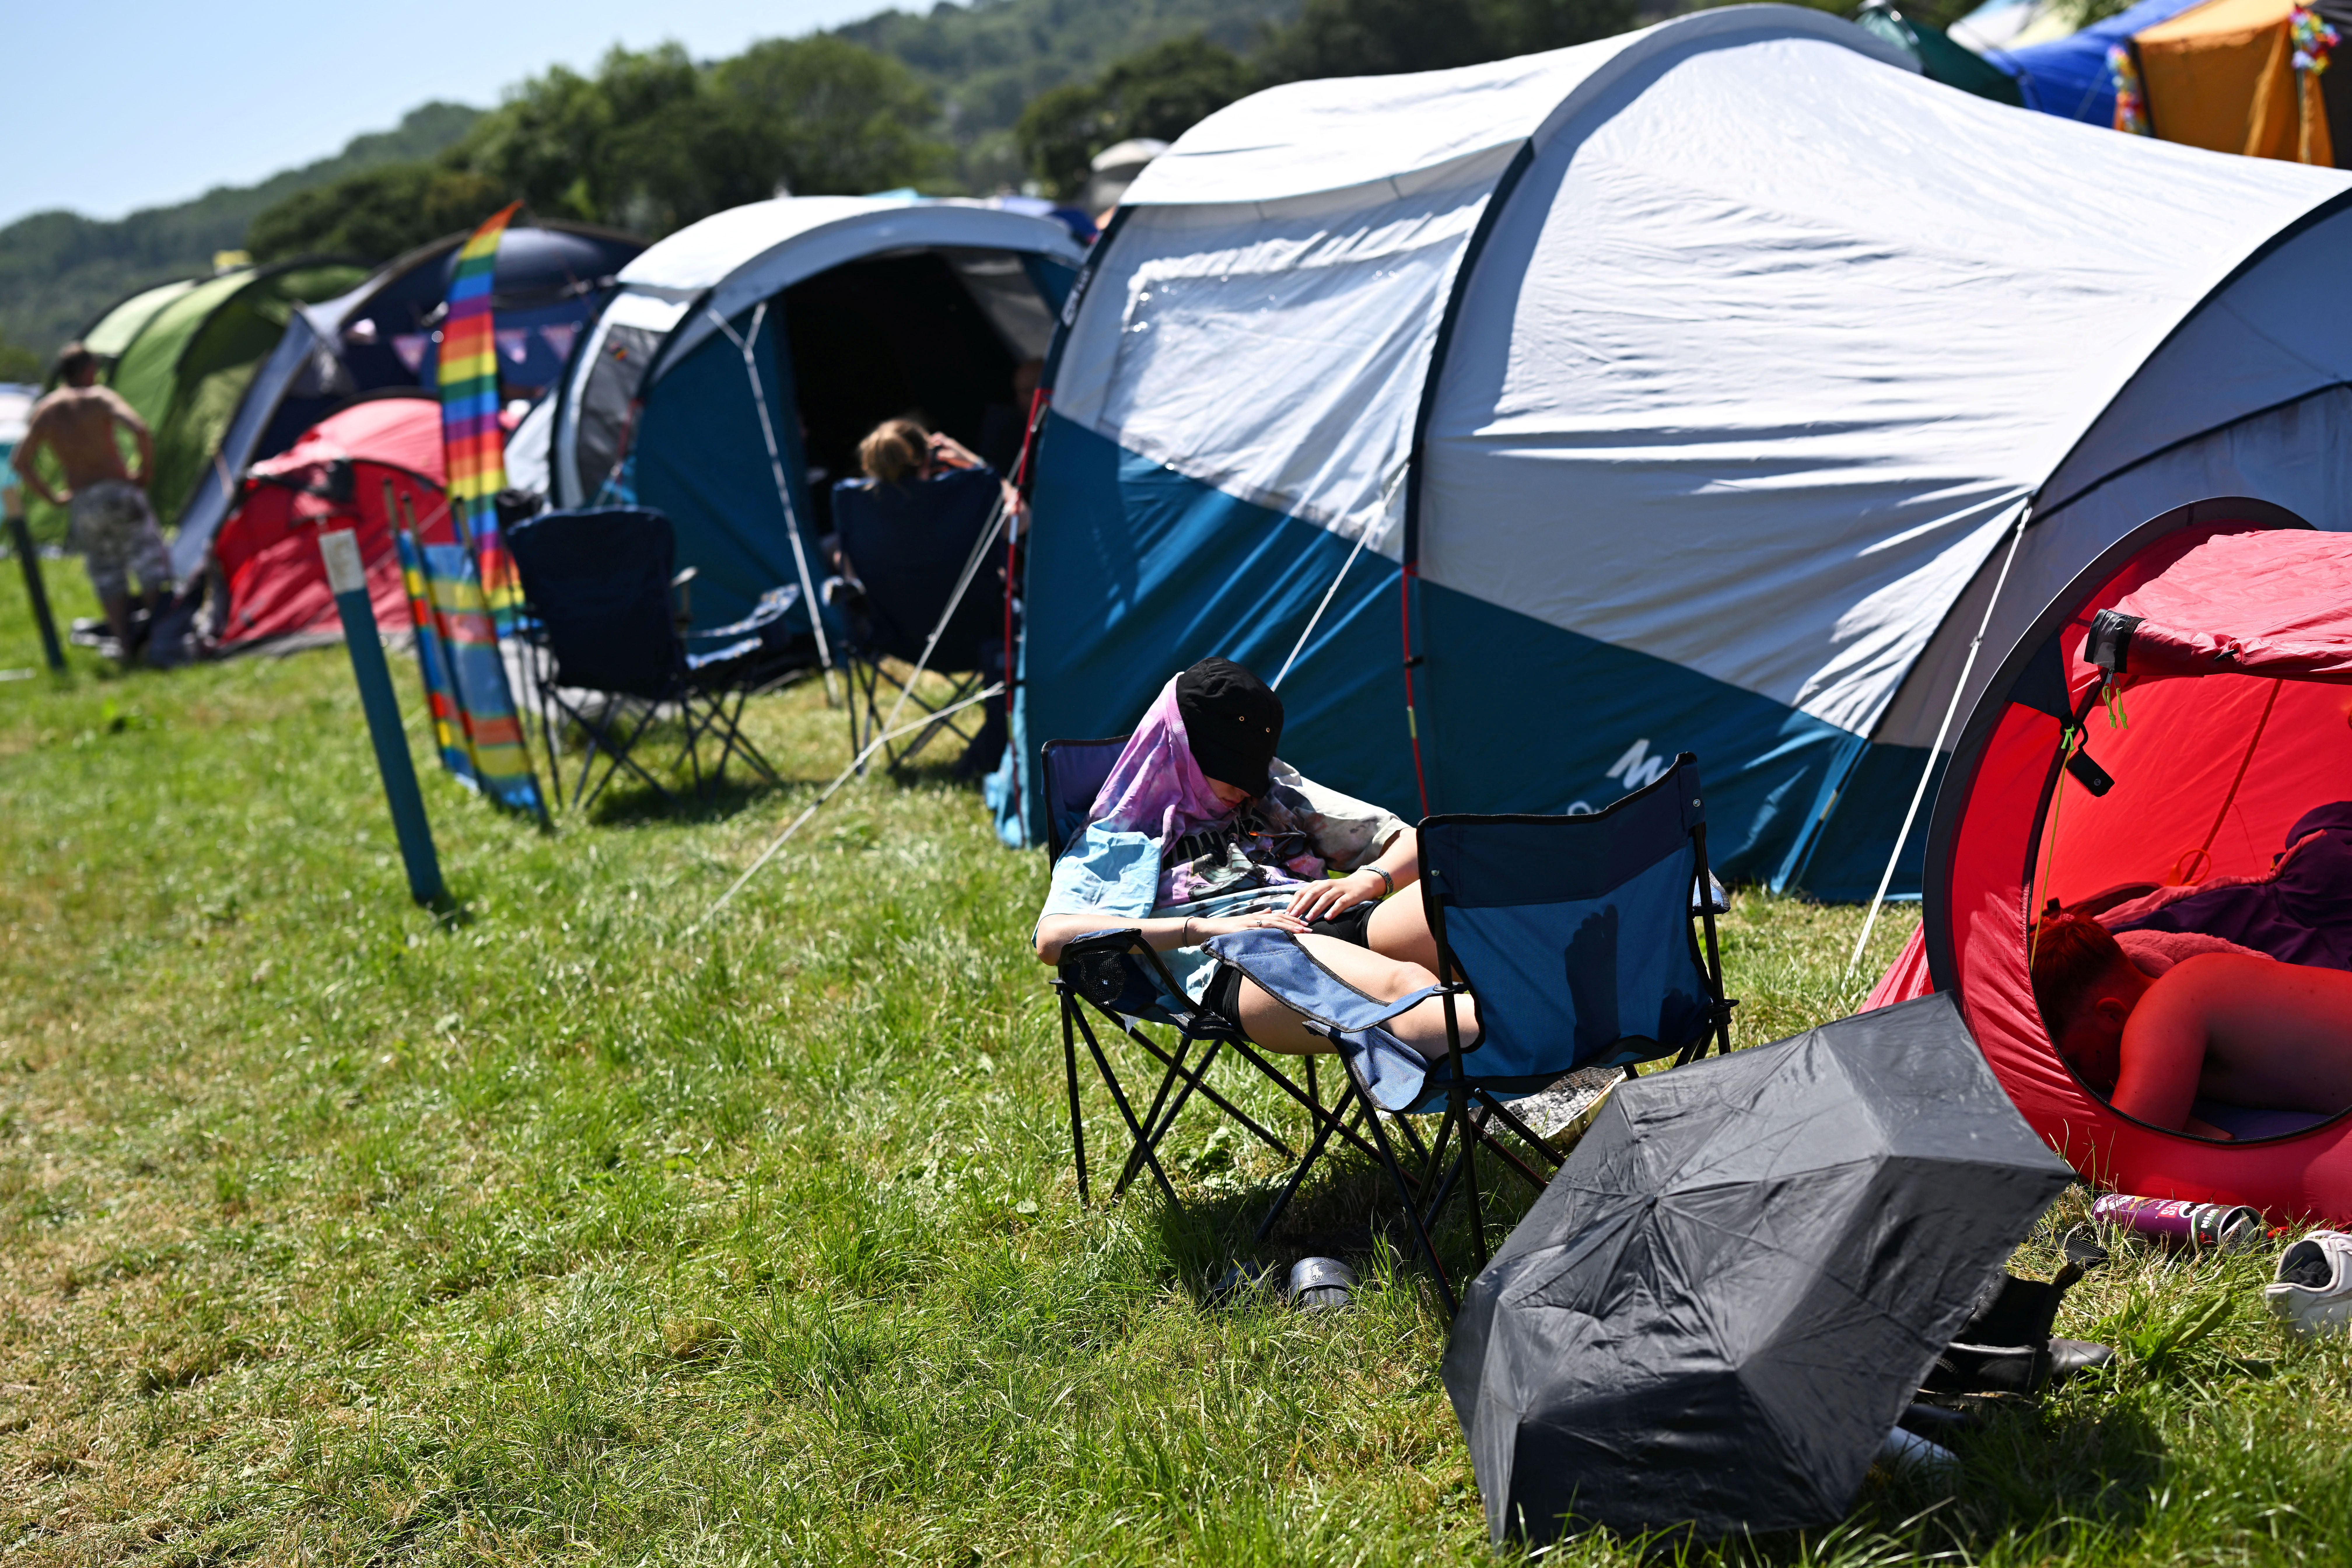 Revellers rest at Worthy Farm in Somerset during the Glastonbury Festival